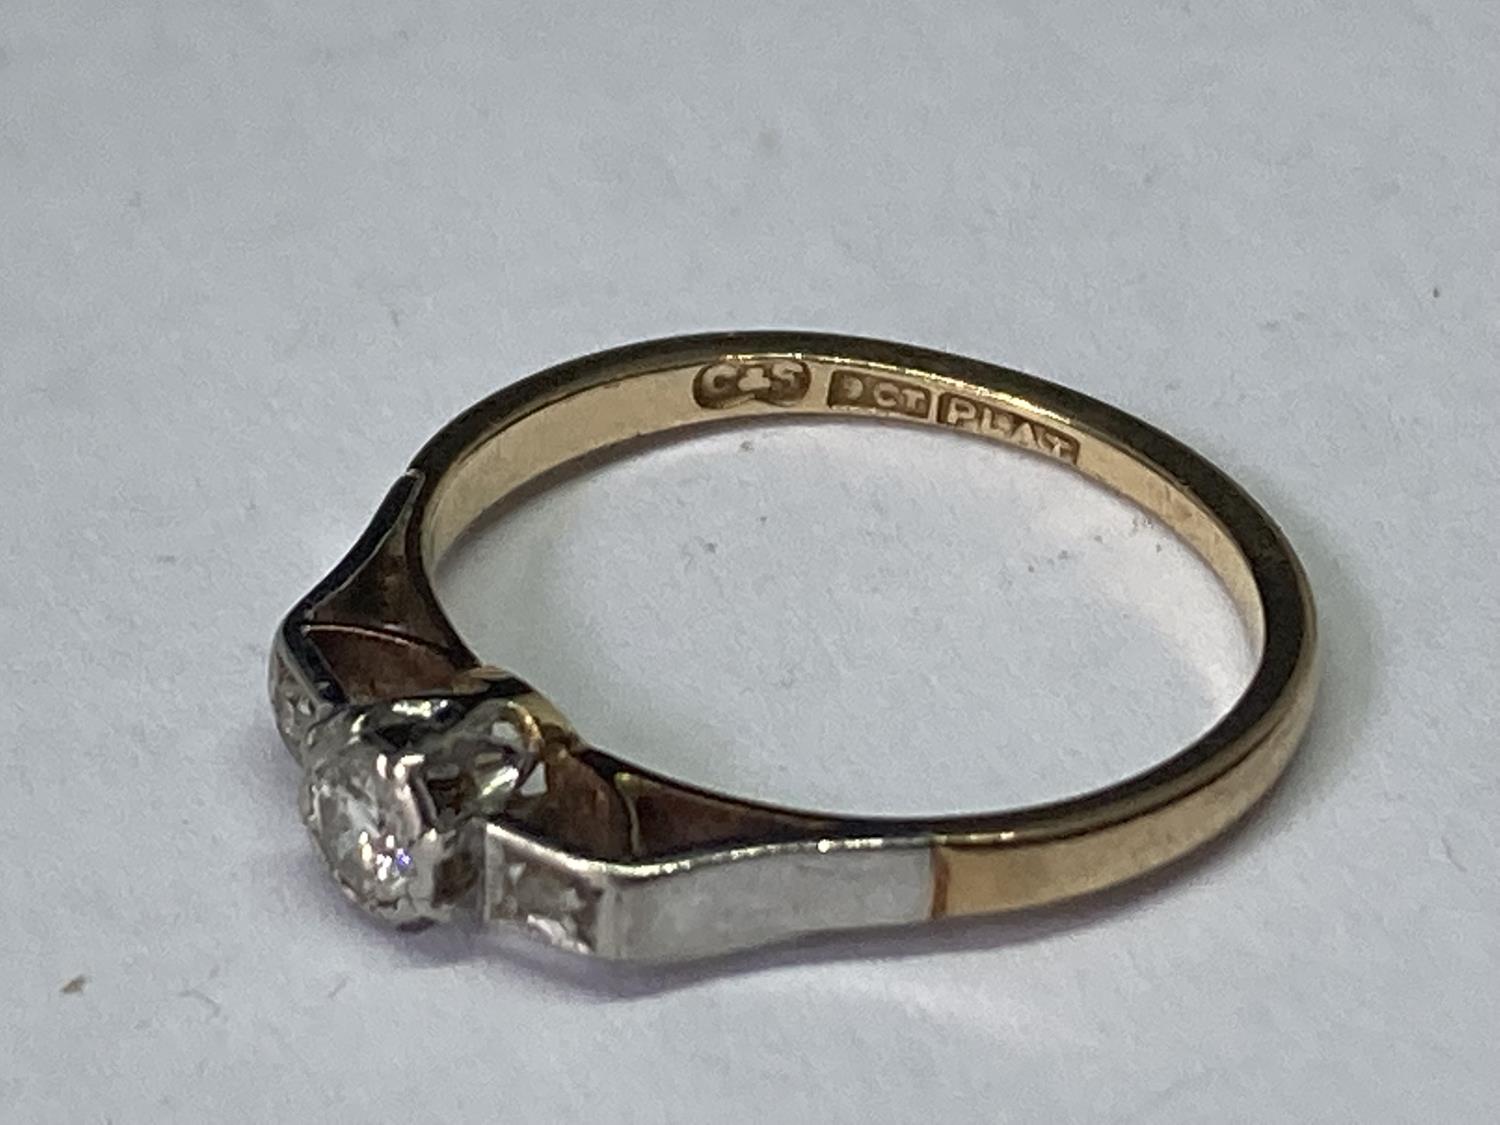 A 9 CARAT GOLD RING WITH DIAMONDS SIZE K/L - Image 2 of 3